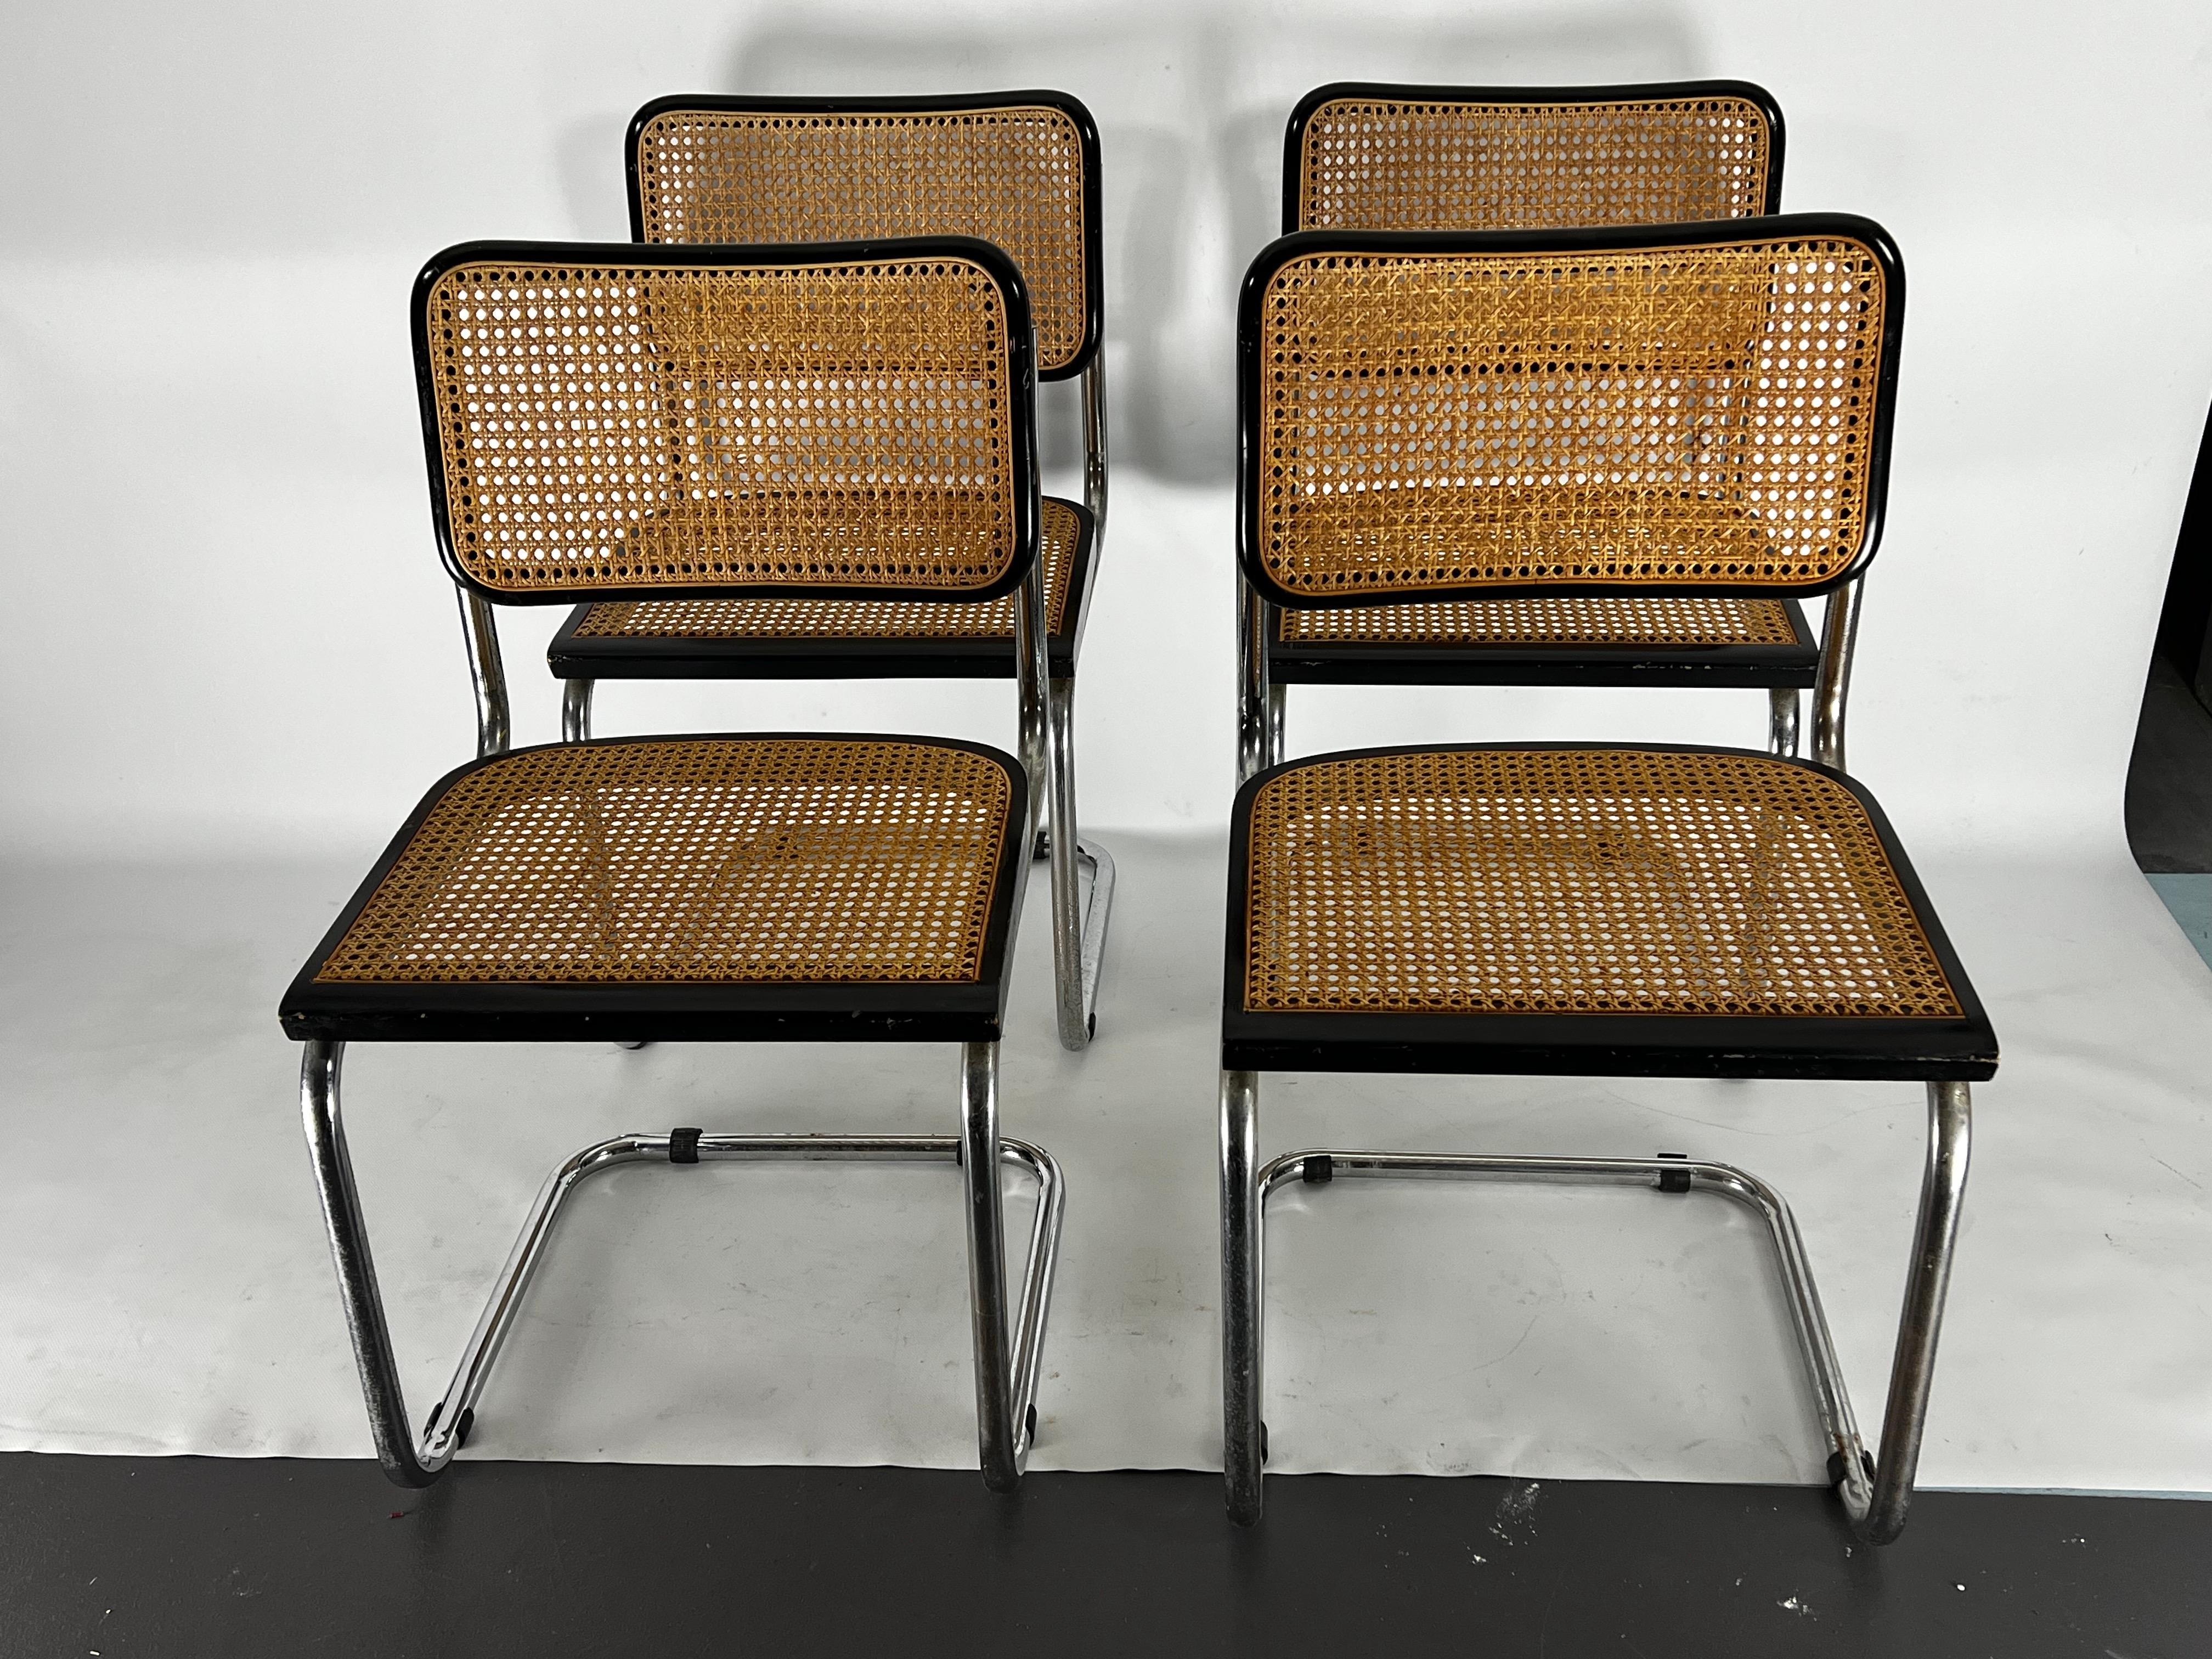 Four Cesca chairs designed by Marcel Breuer and produced in Italy by Gavina during the 60s.
Very good vintage condition with normal trace of age and use. Slight oxidation on the chrome. 
H seat 46 cm.